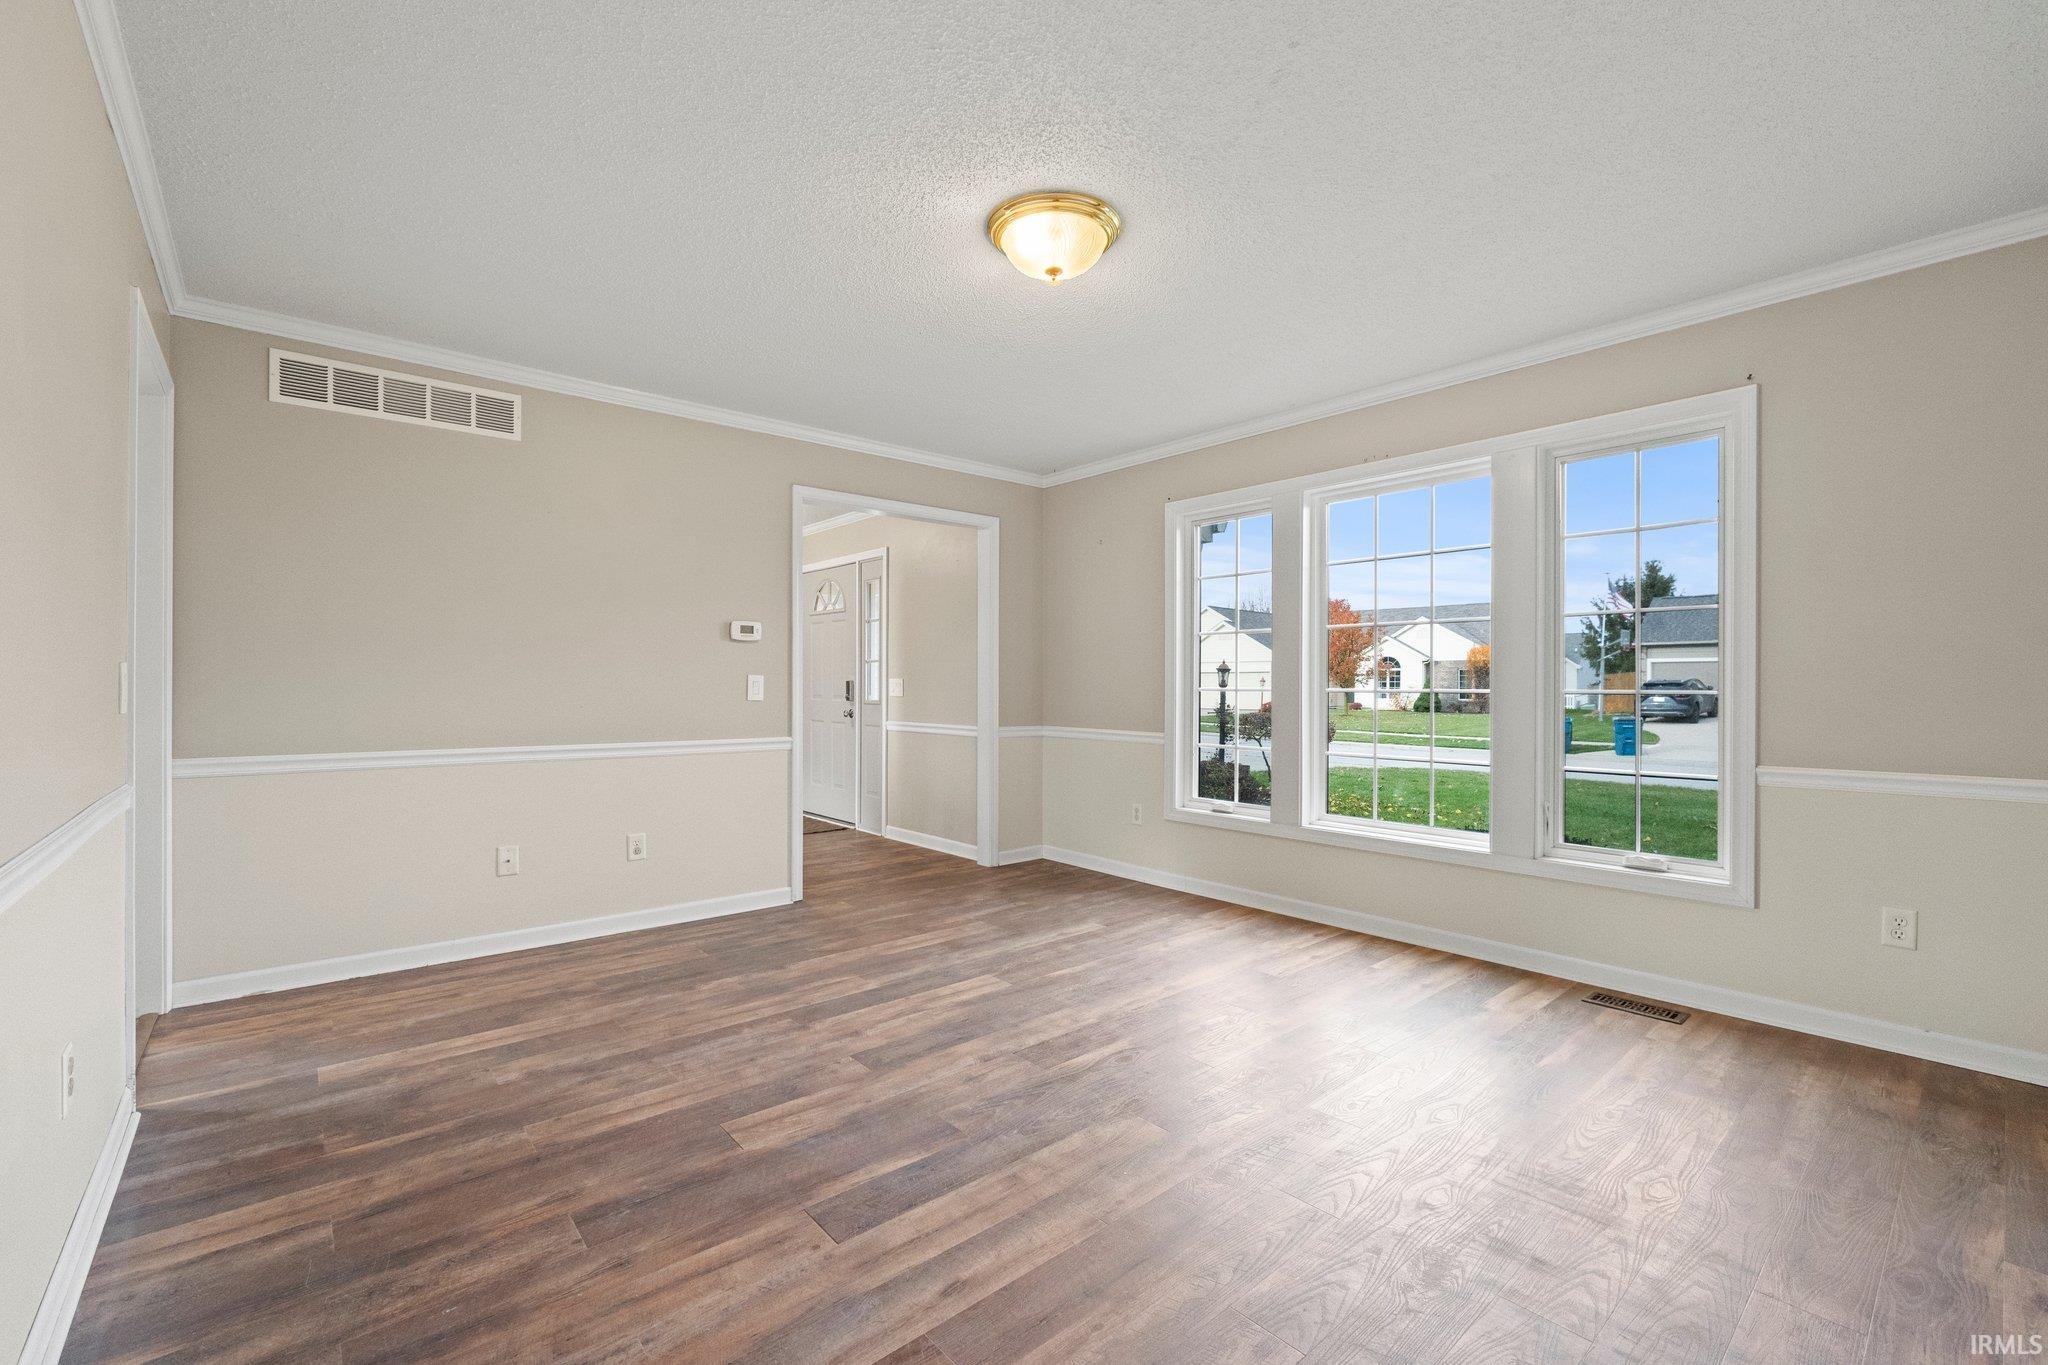 Photo 5 of 14903 Sea Holly Court